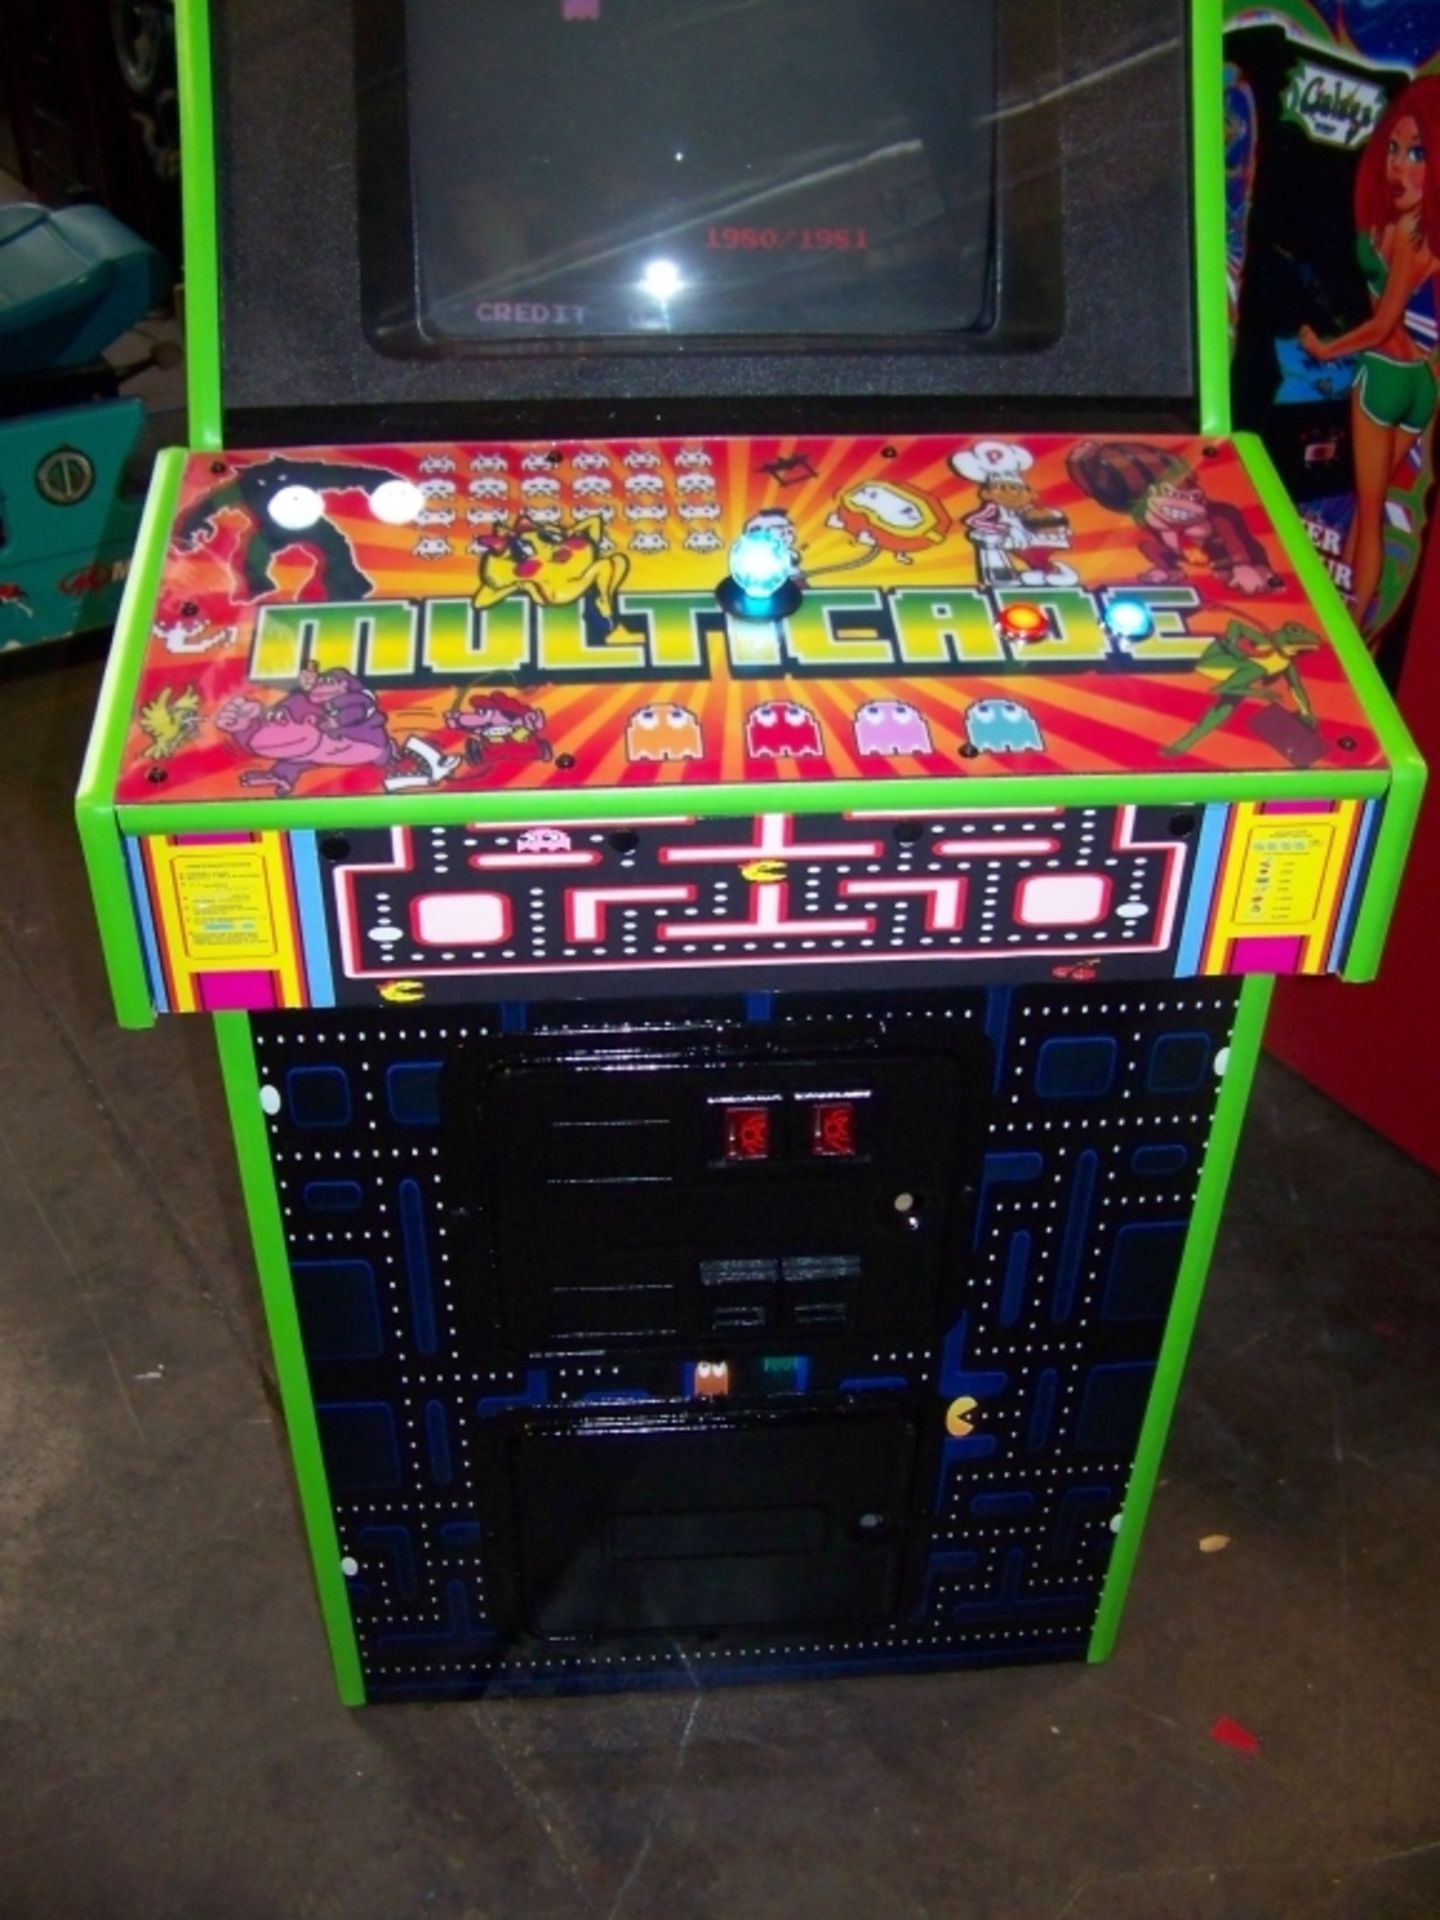 60 IN 1 MULTICADE UPRIGHT ARCADE GAME Item is in used condition. Evidence of wear and commercial - Image 4 of 7